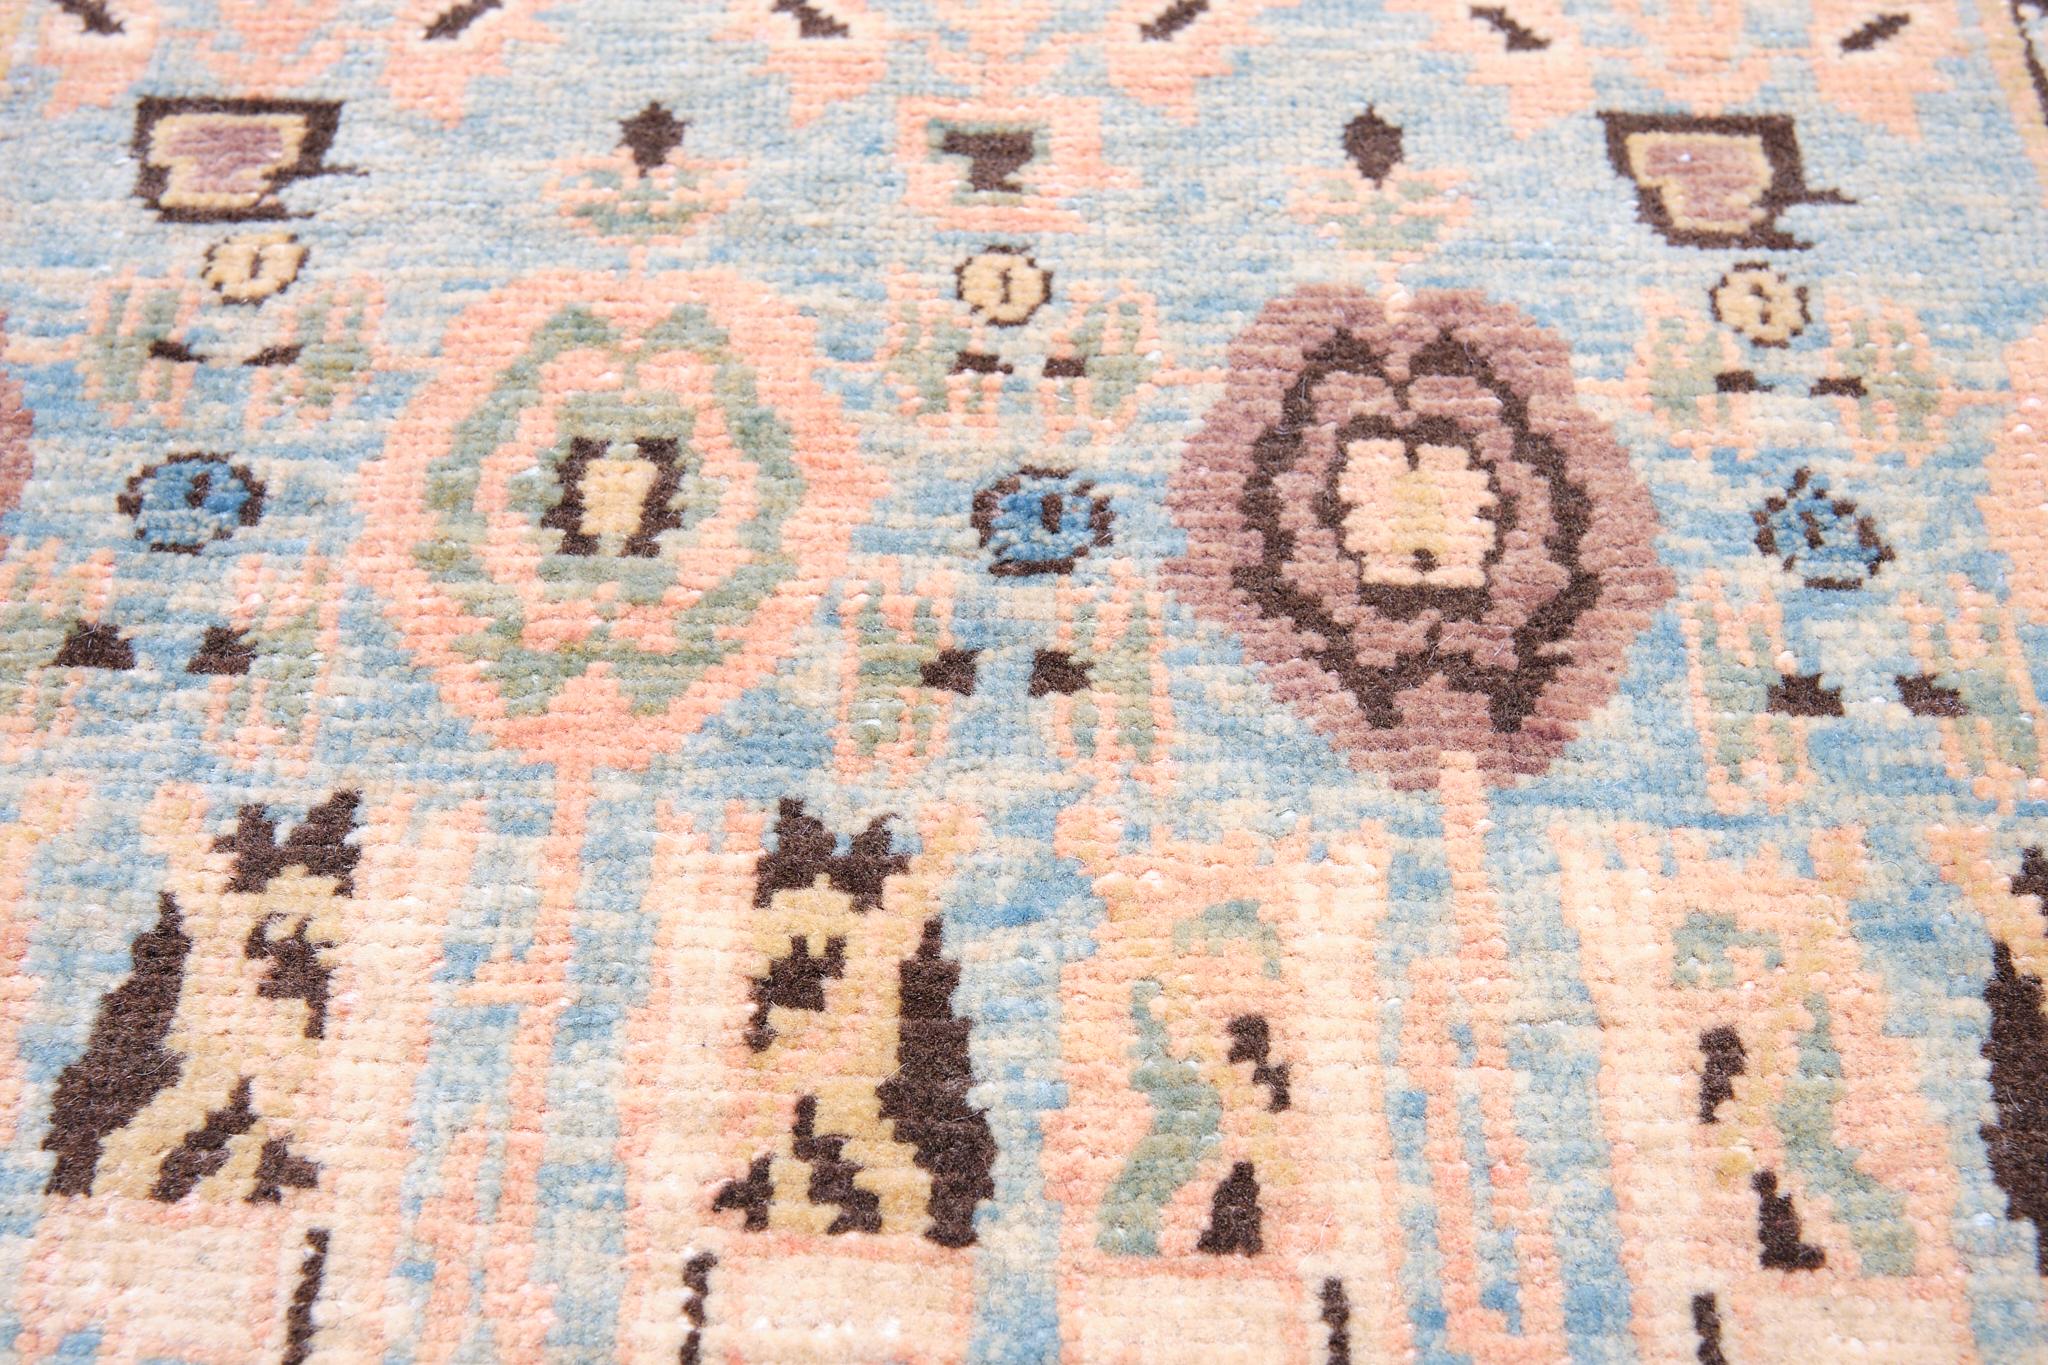 Turkish Ararat Rugs Senna Rows of Flowers Rug Wagireh Revival Carpet Natural Dyed For Sale